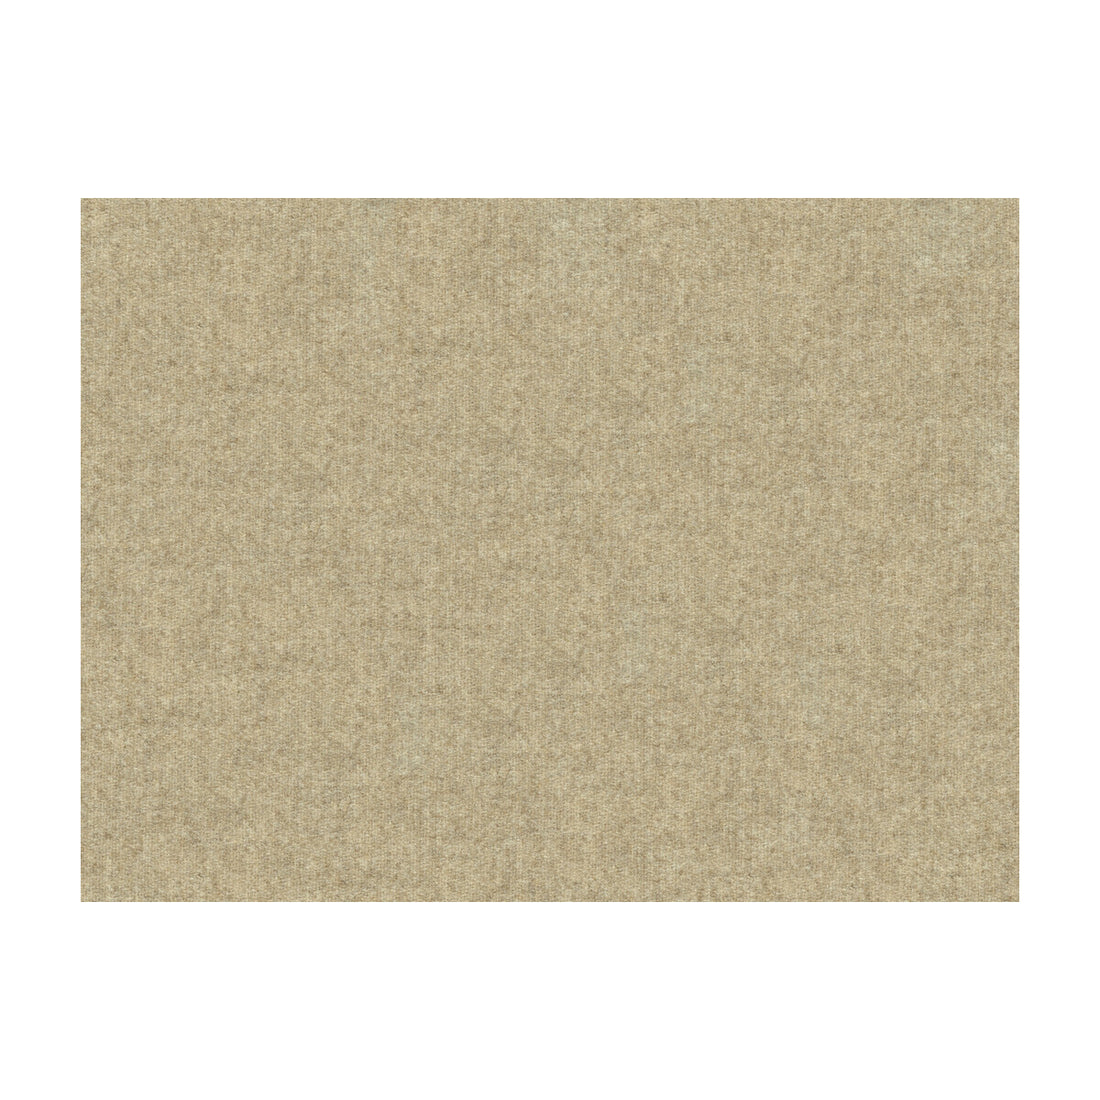 Chevalier Wool fabric in jute color - pattern 8013149.161.0 - by Brunschwig &amp; Fils